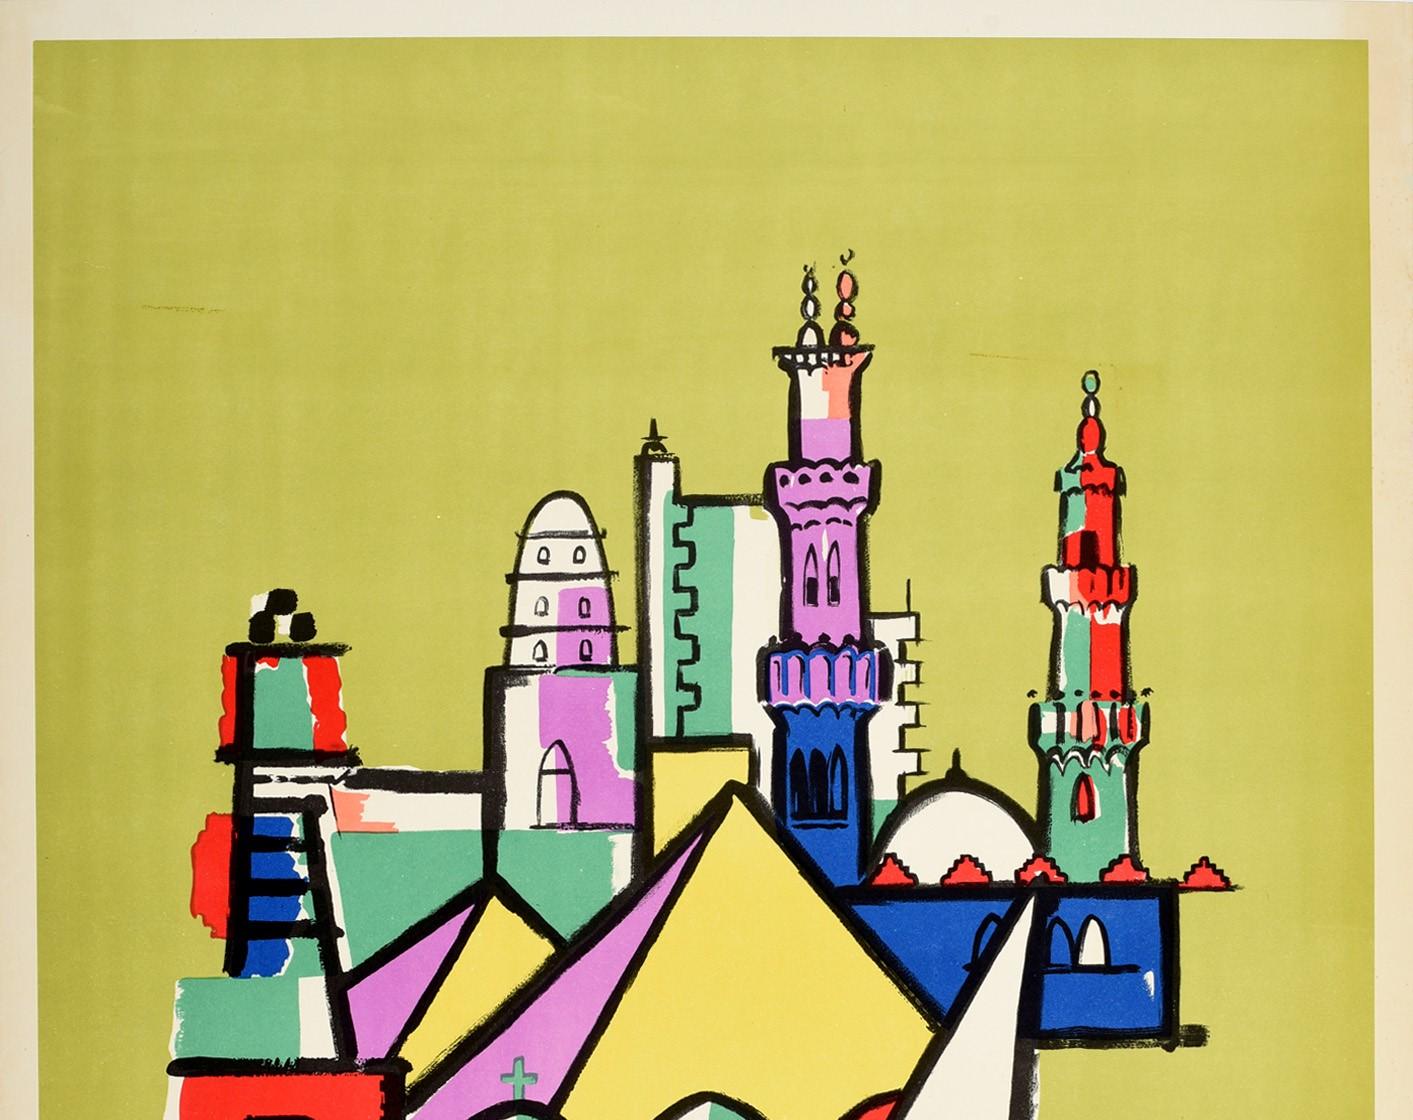 Original vintage travel advertising poster for Egypt The Cradle of Civilisation U.A.R. featuring a colourful modernist design depicting traditional sailing boats / felucca in the foreground with people, the ancient pyramids and mosques, spires and